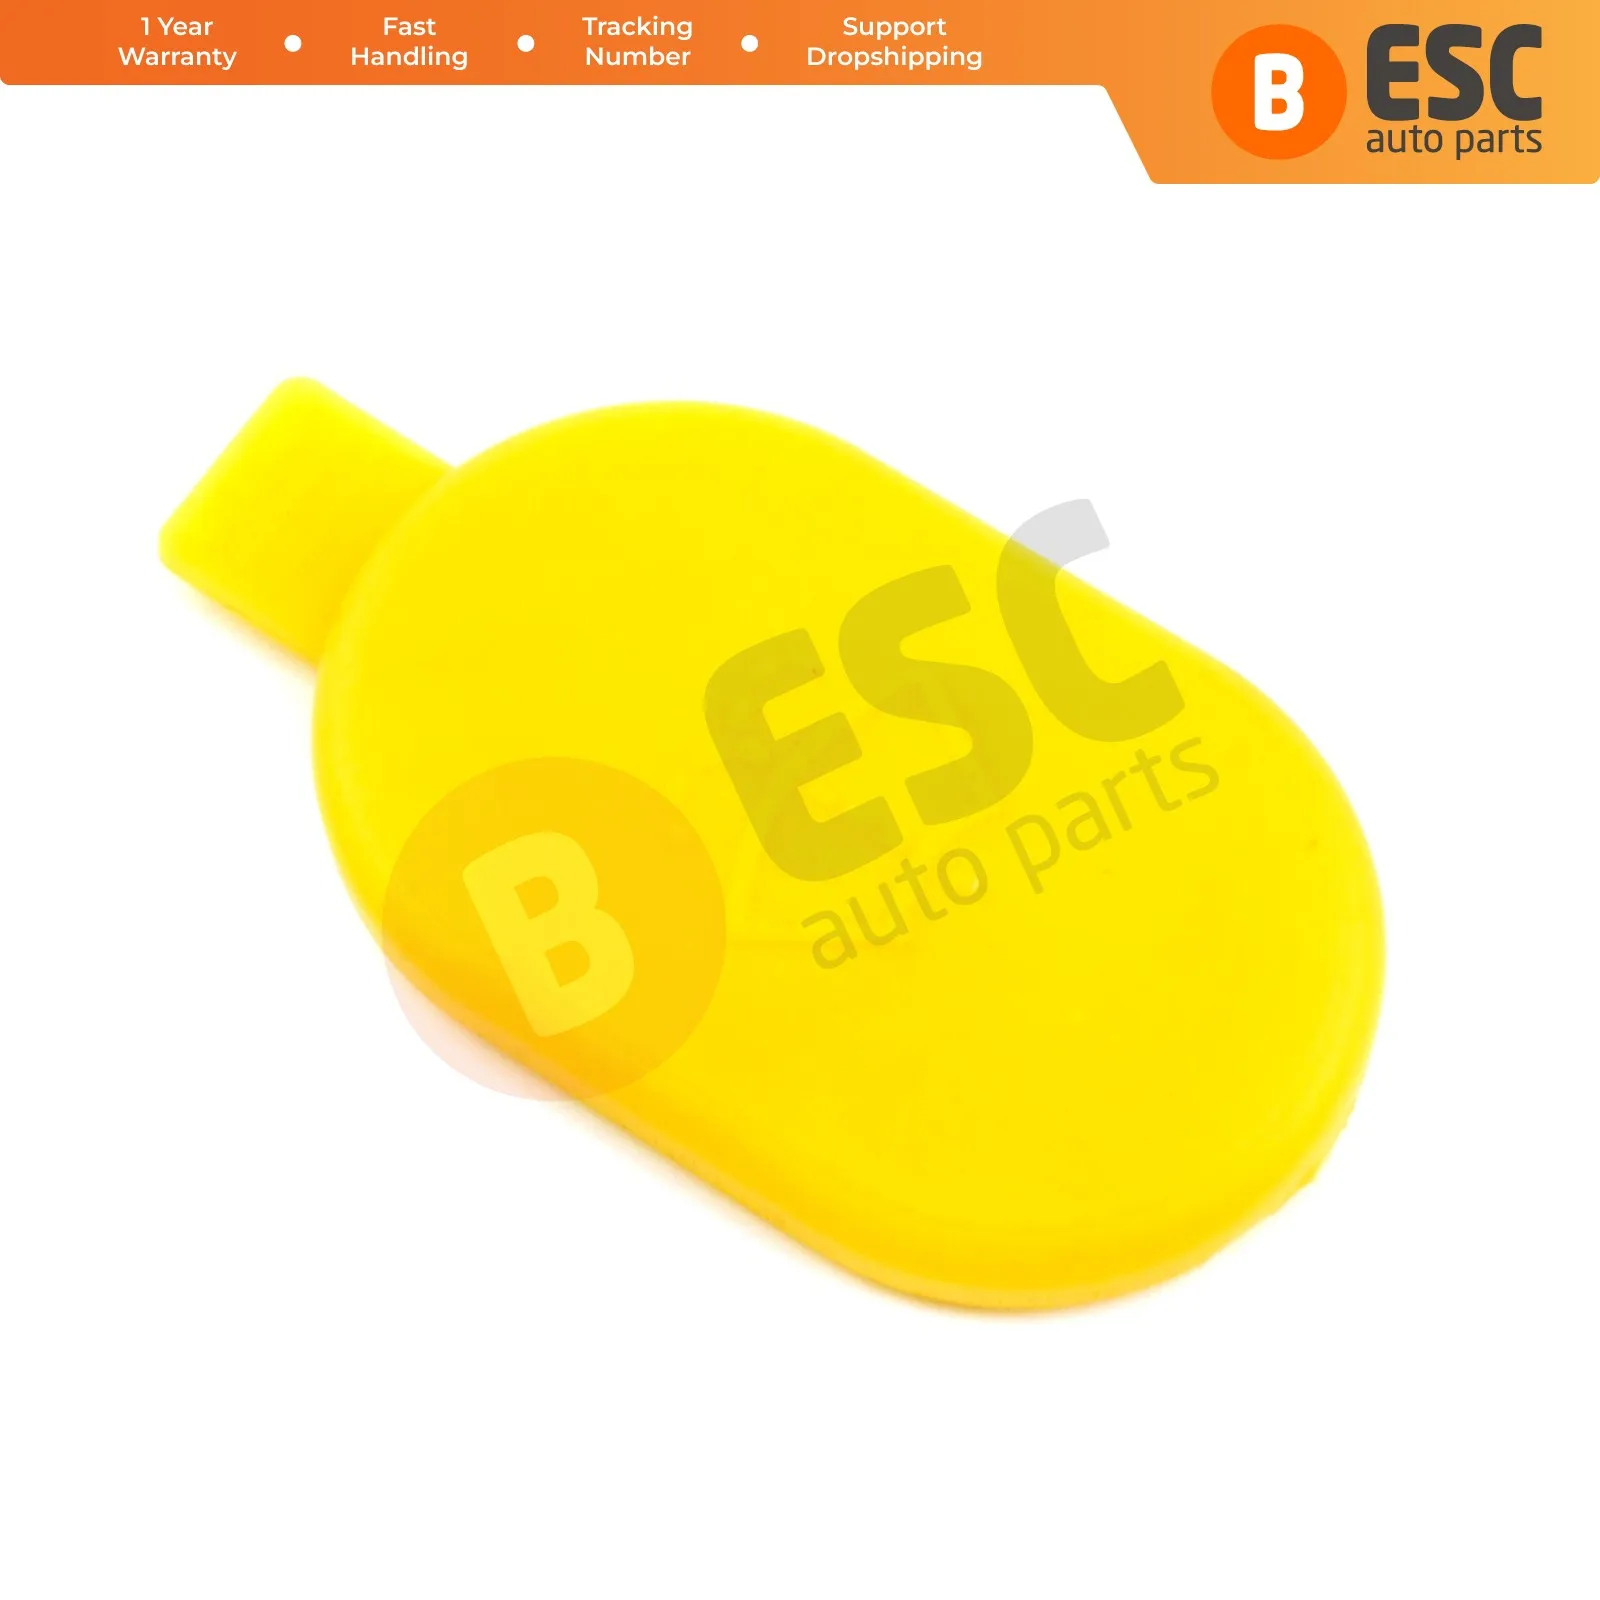 

ESP714 Windshield Washer Fluid Water Bottle Tank Cap Lid 1060681 92GG17632AA for Ford Ford Transit Focus Connect Fiesta Escort